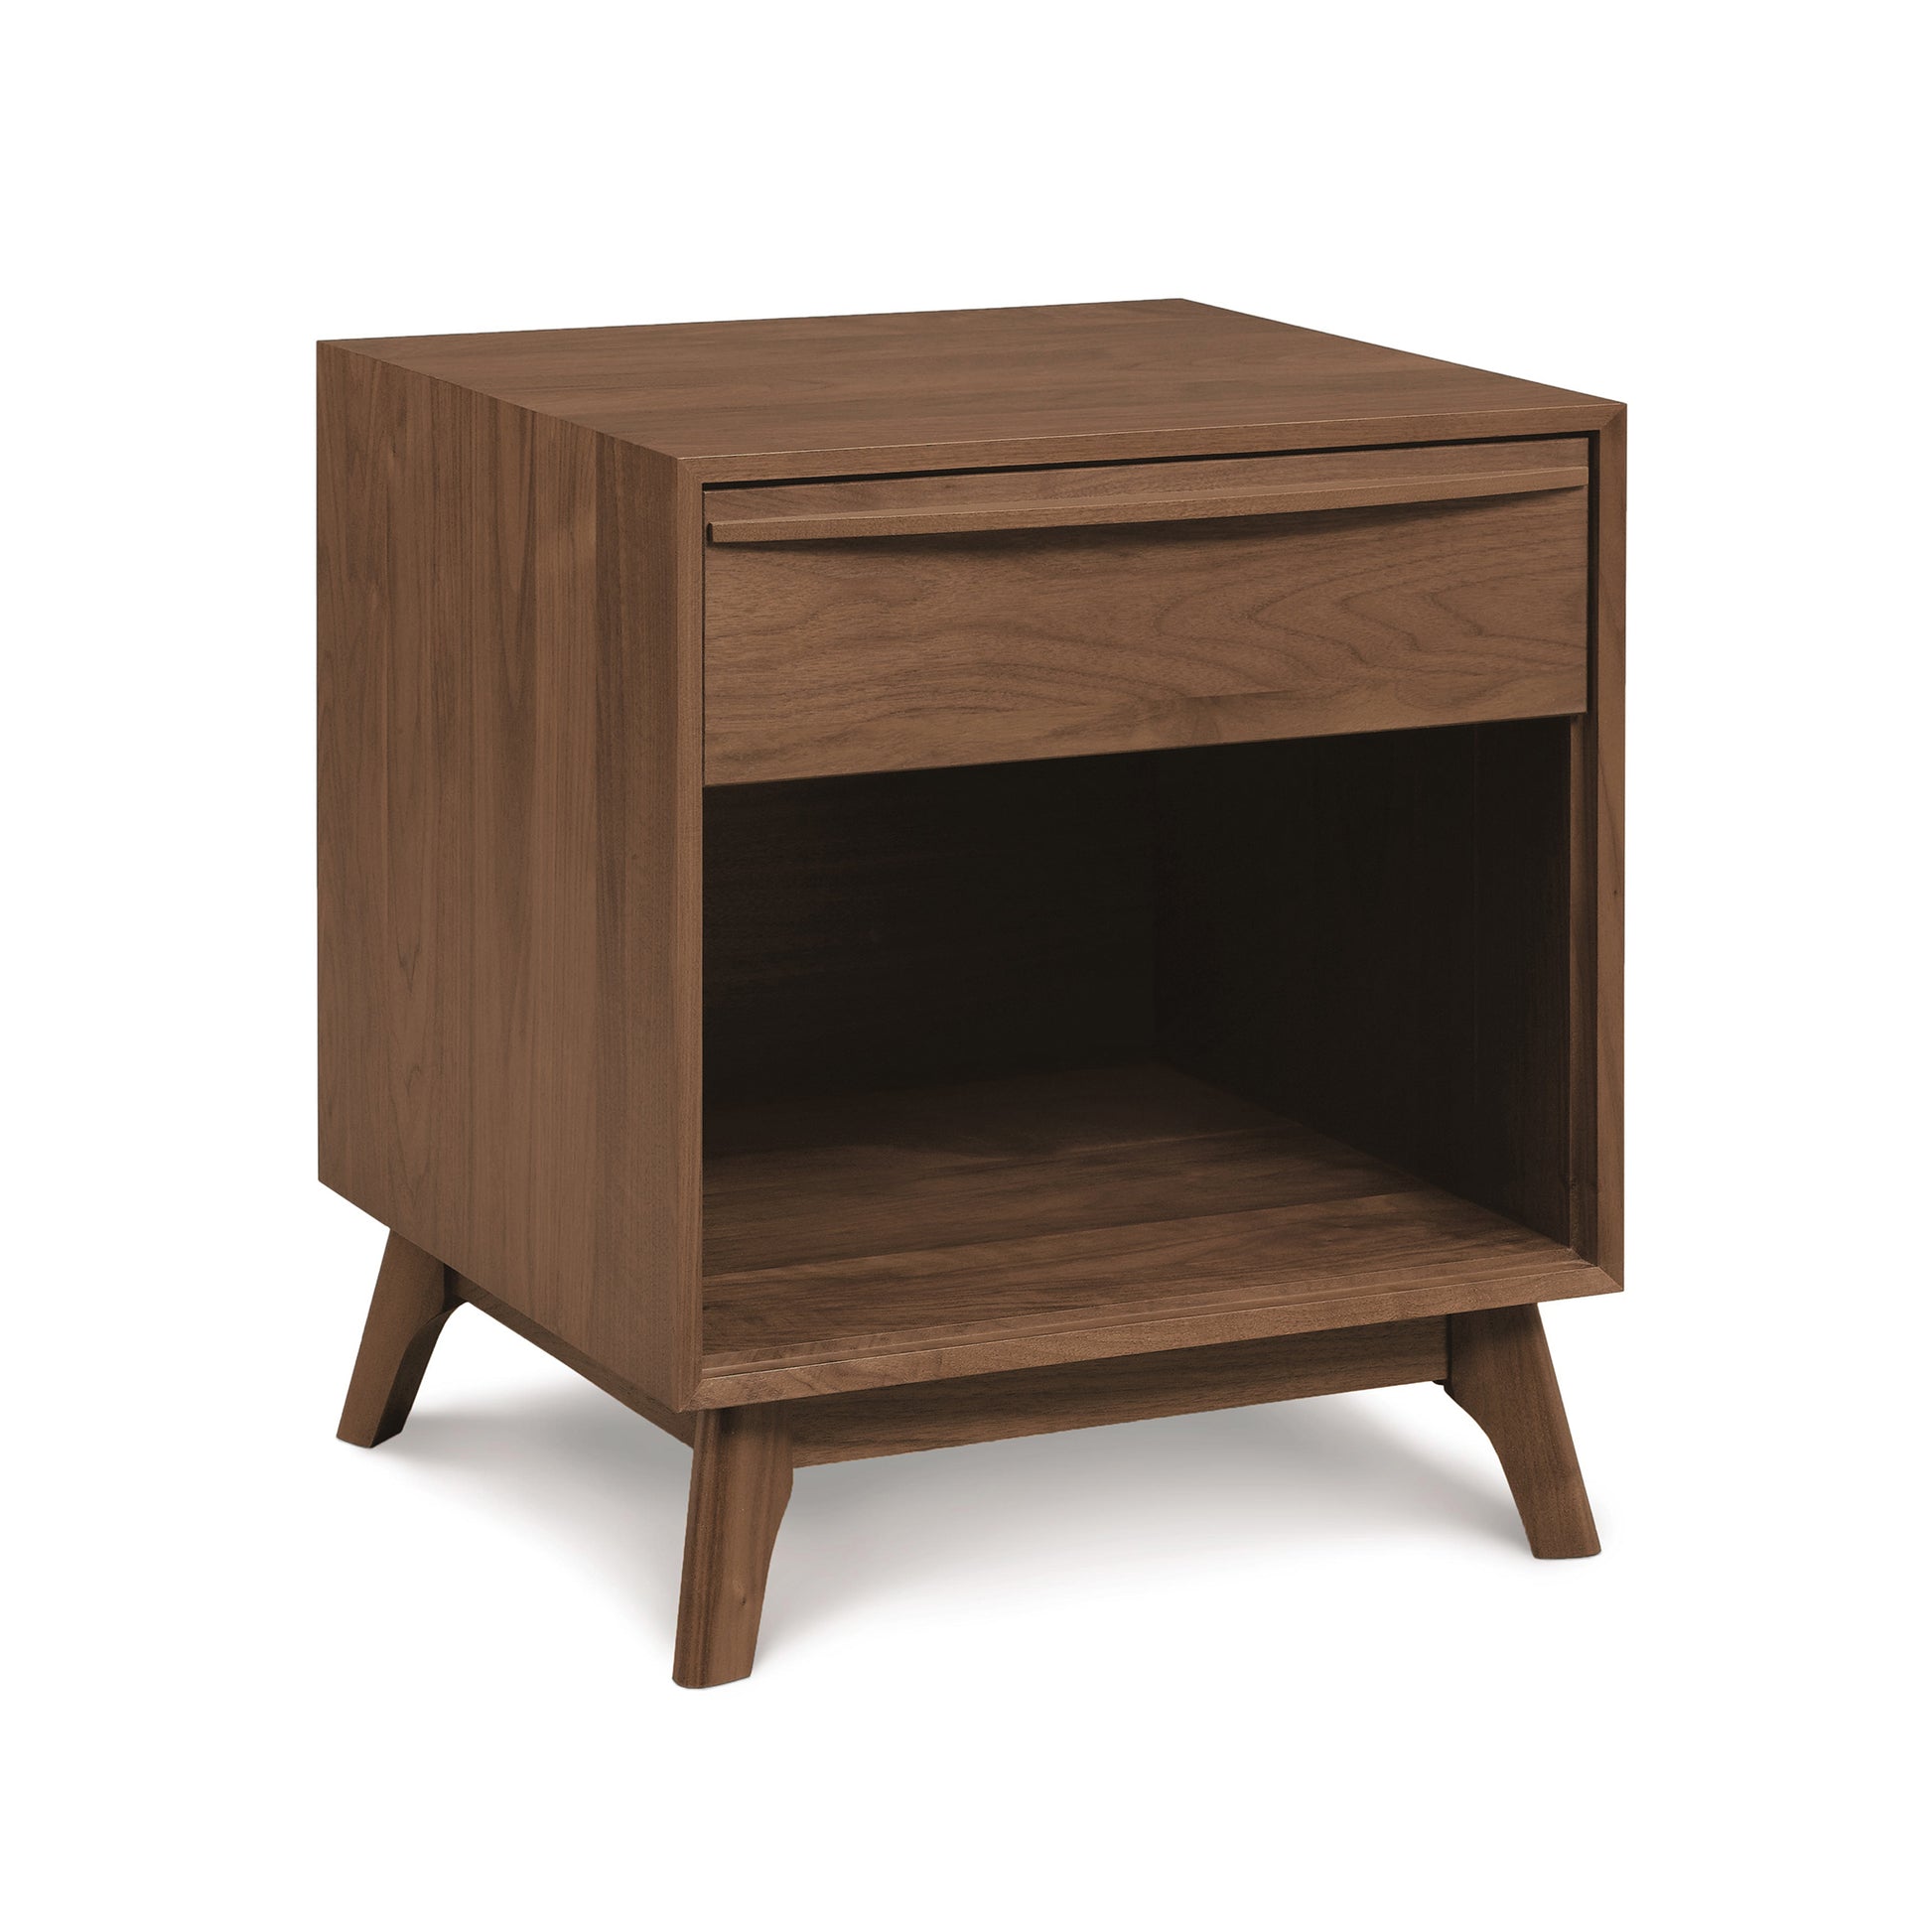 A modern wooden nightstand from the Copeland Furniture Catalina Bedroom Collection, with an open shelf and a single drawer, set against a white background.